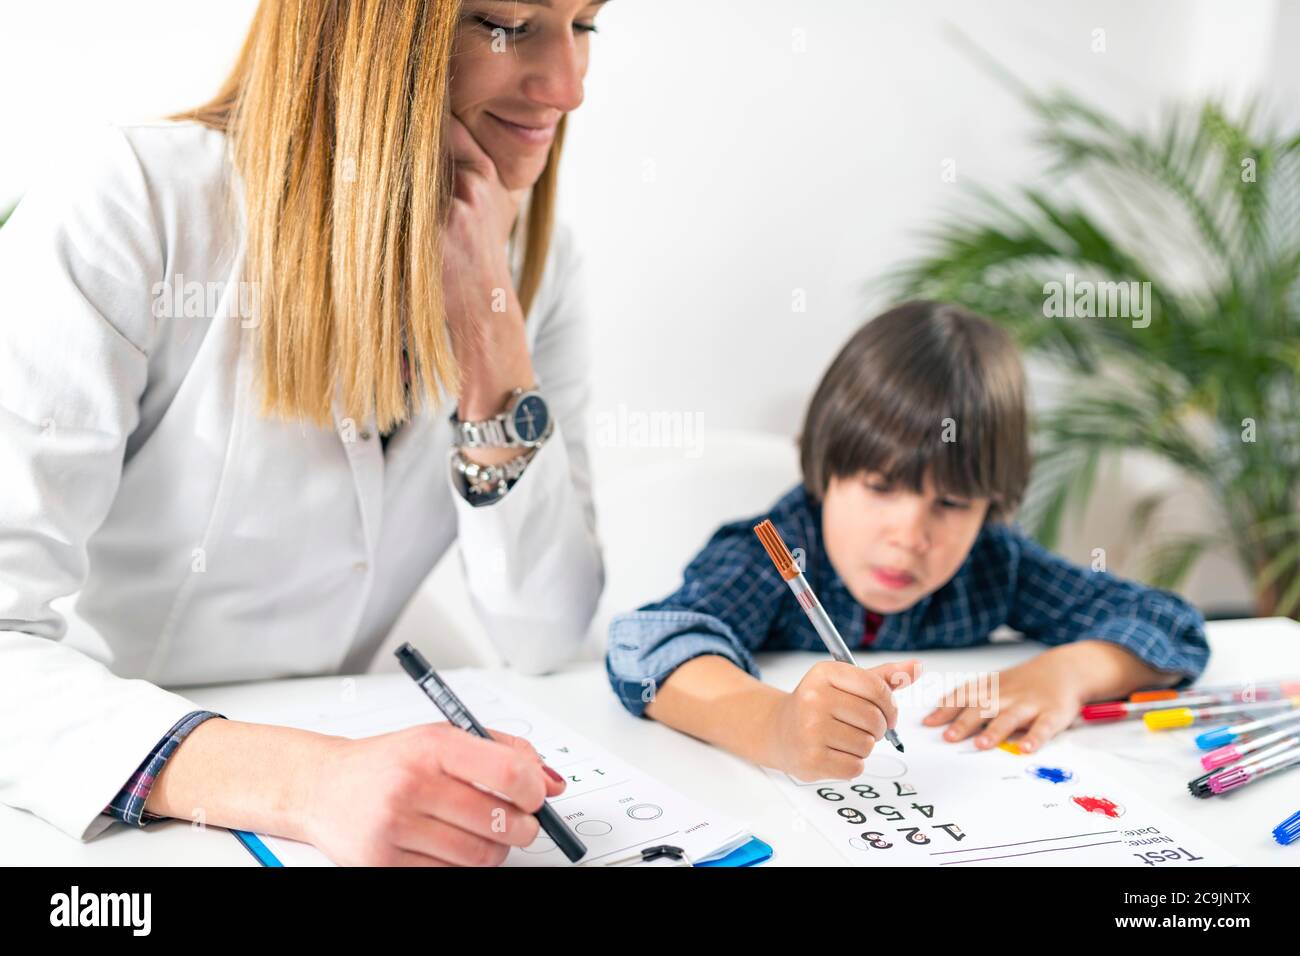 Psychology test for children. Toddler undergoing a logic test with numbers. Stock Photo